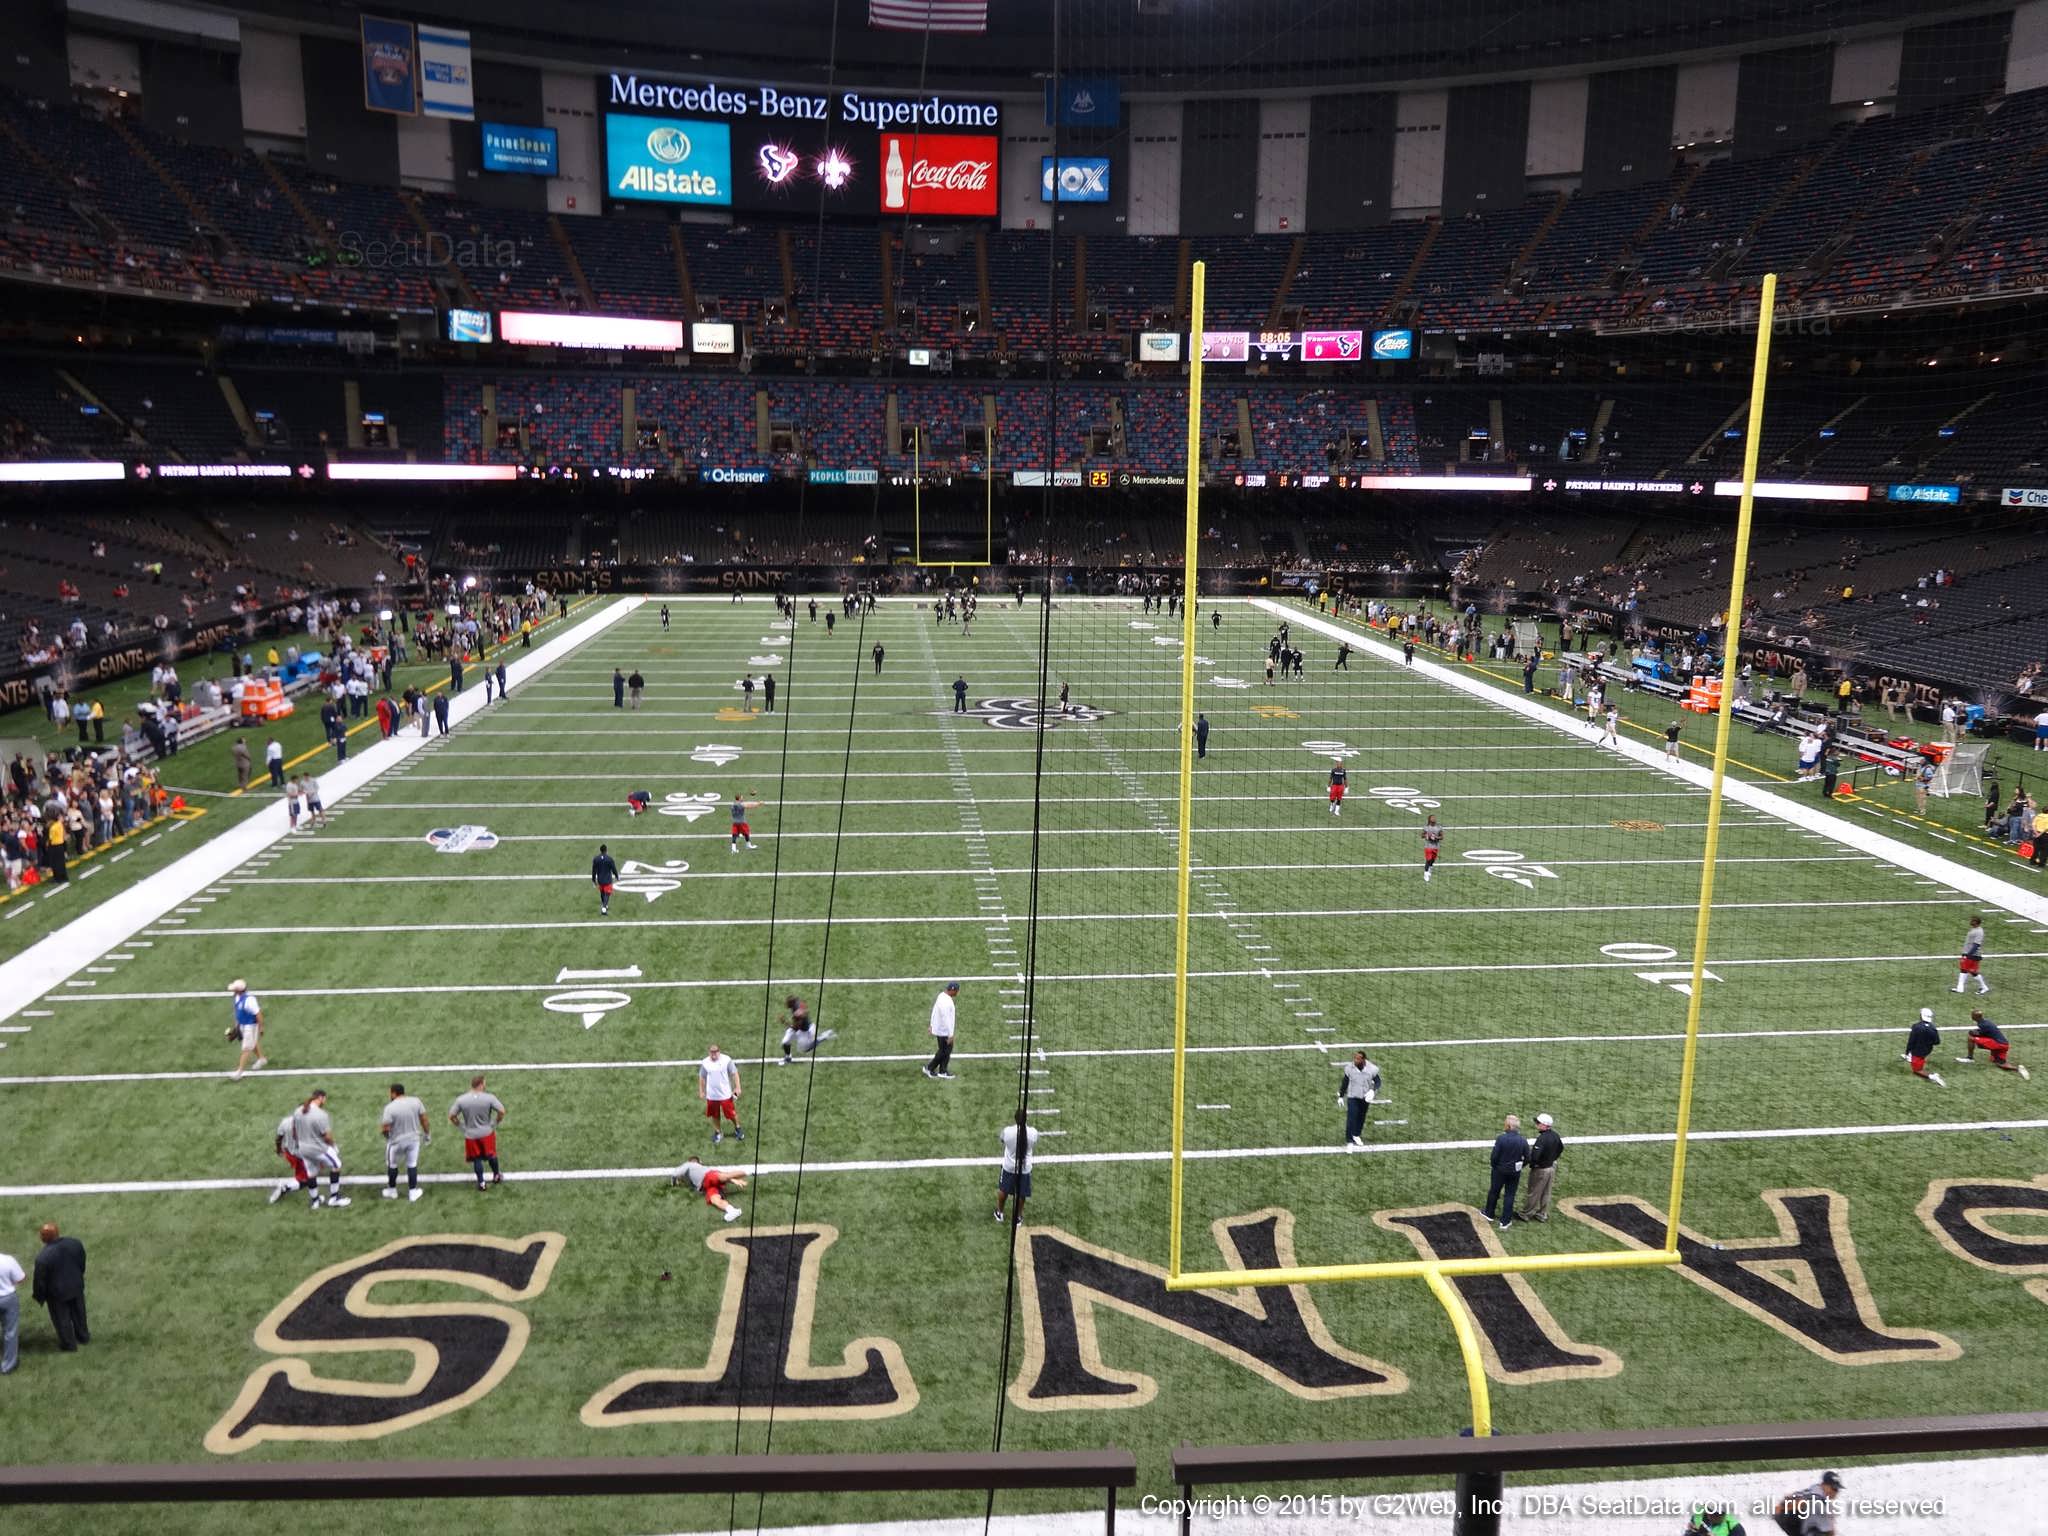 Seat view from section 201 at the Mercedes-Benz Superdome, home of the New Orleans Saints